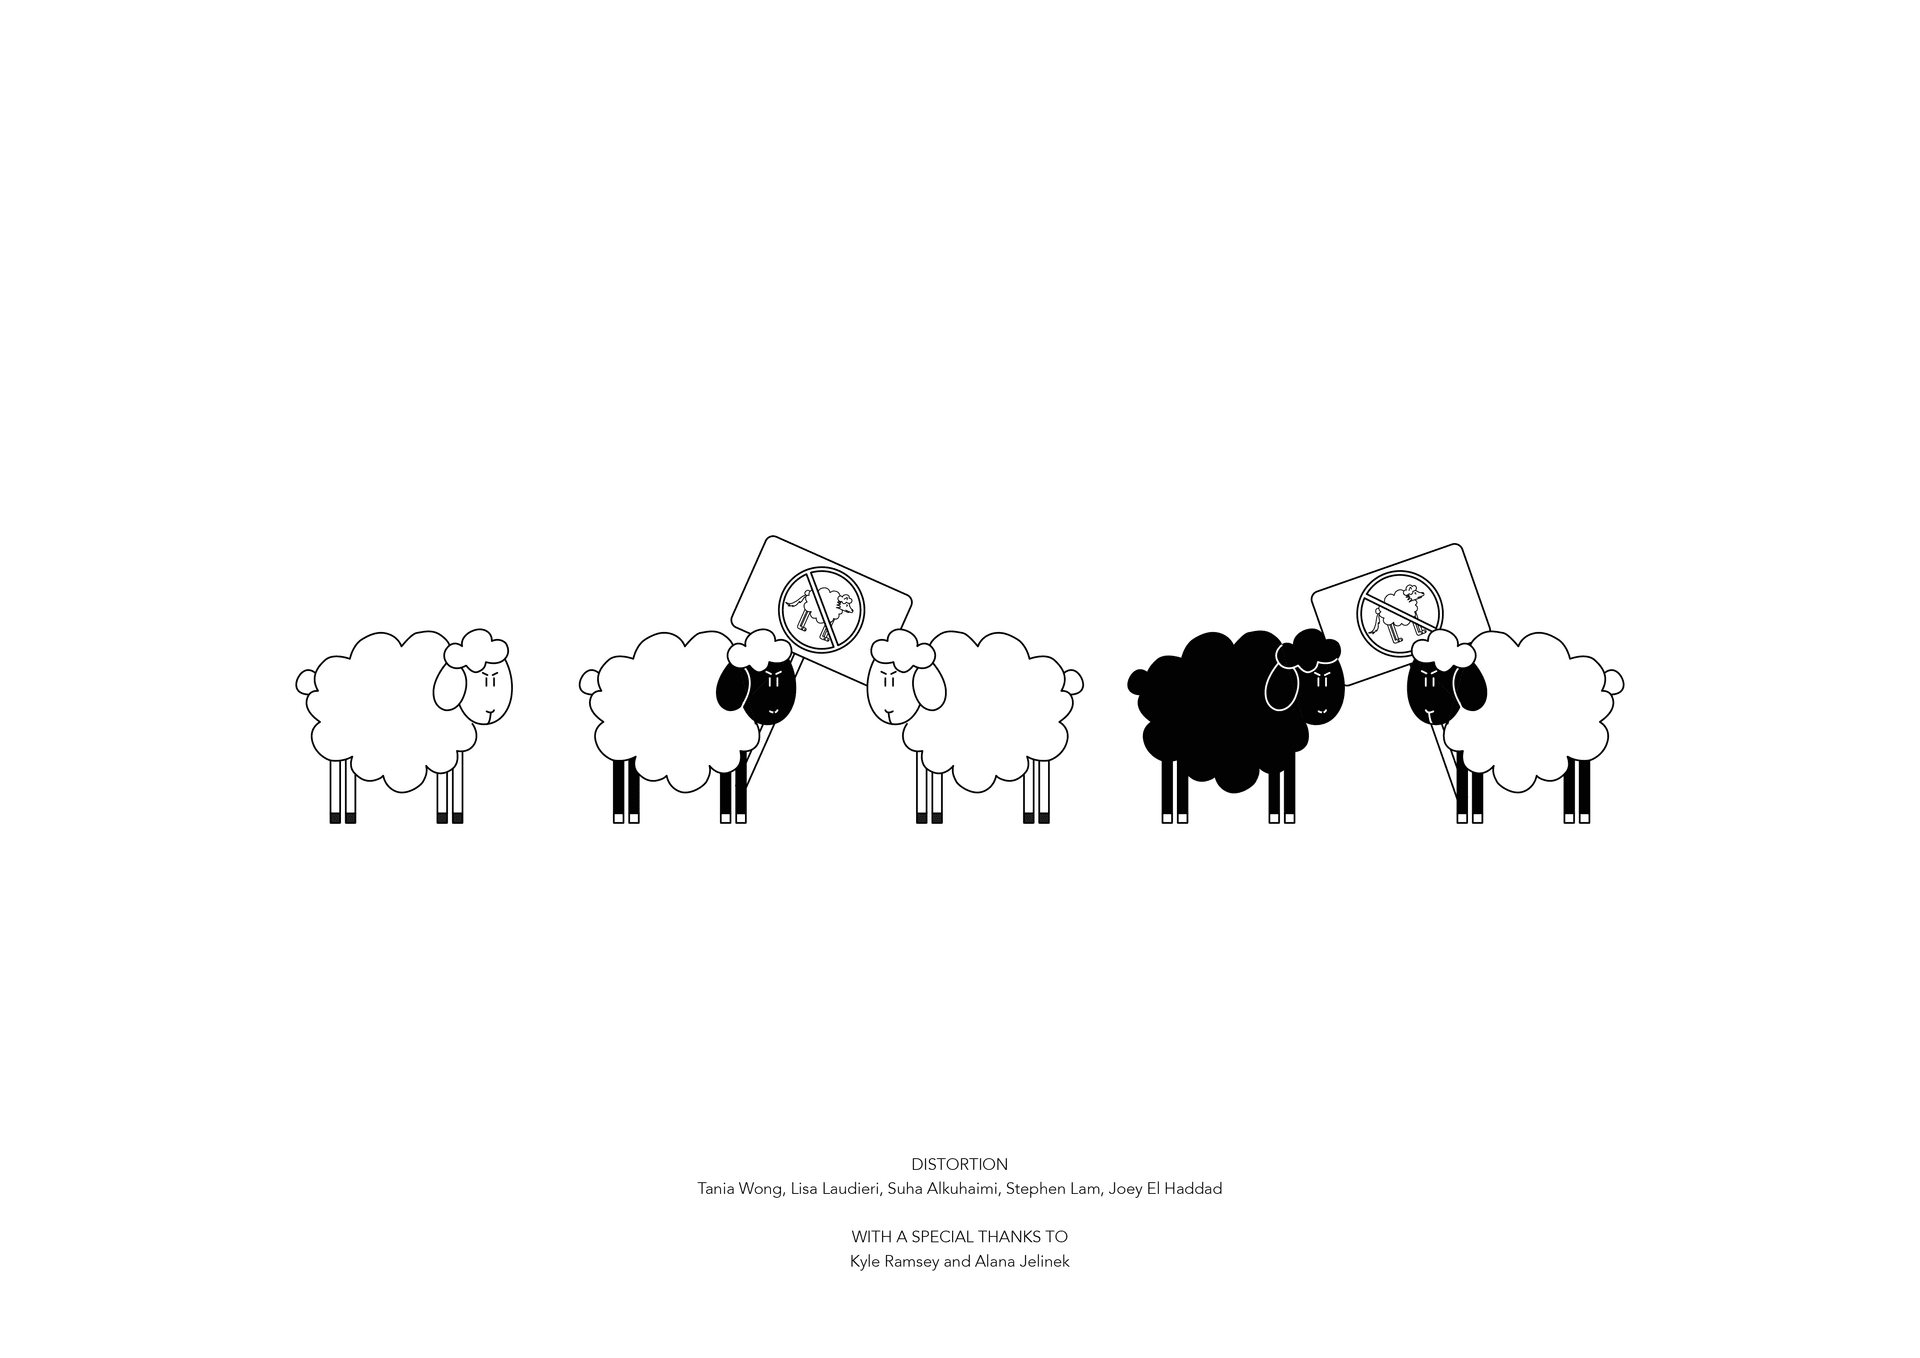 A group of sheep protesting against the wolf